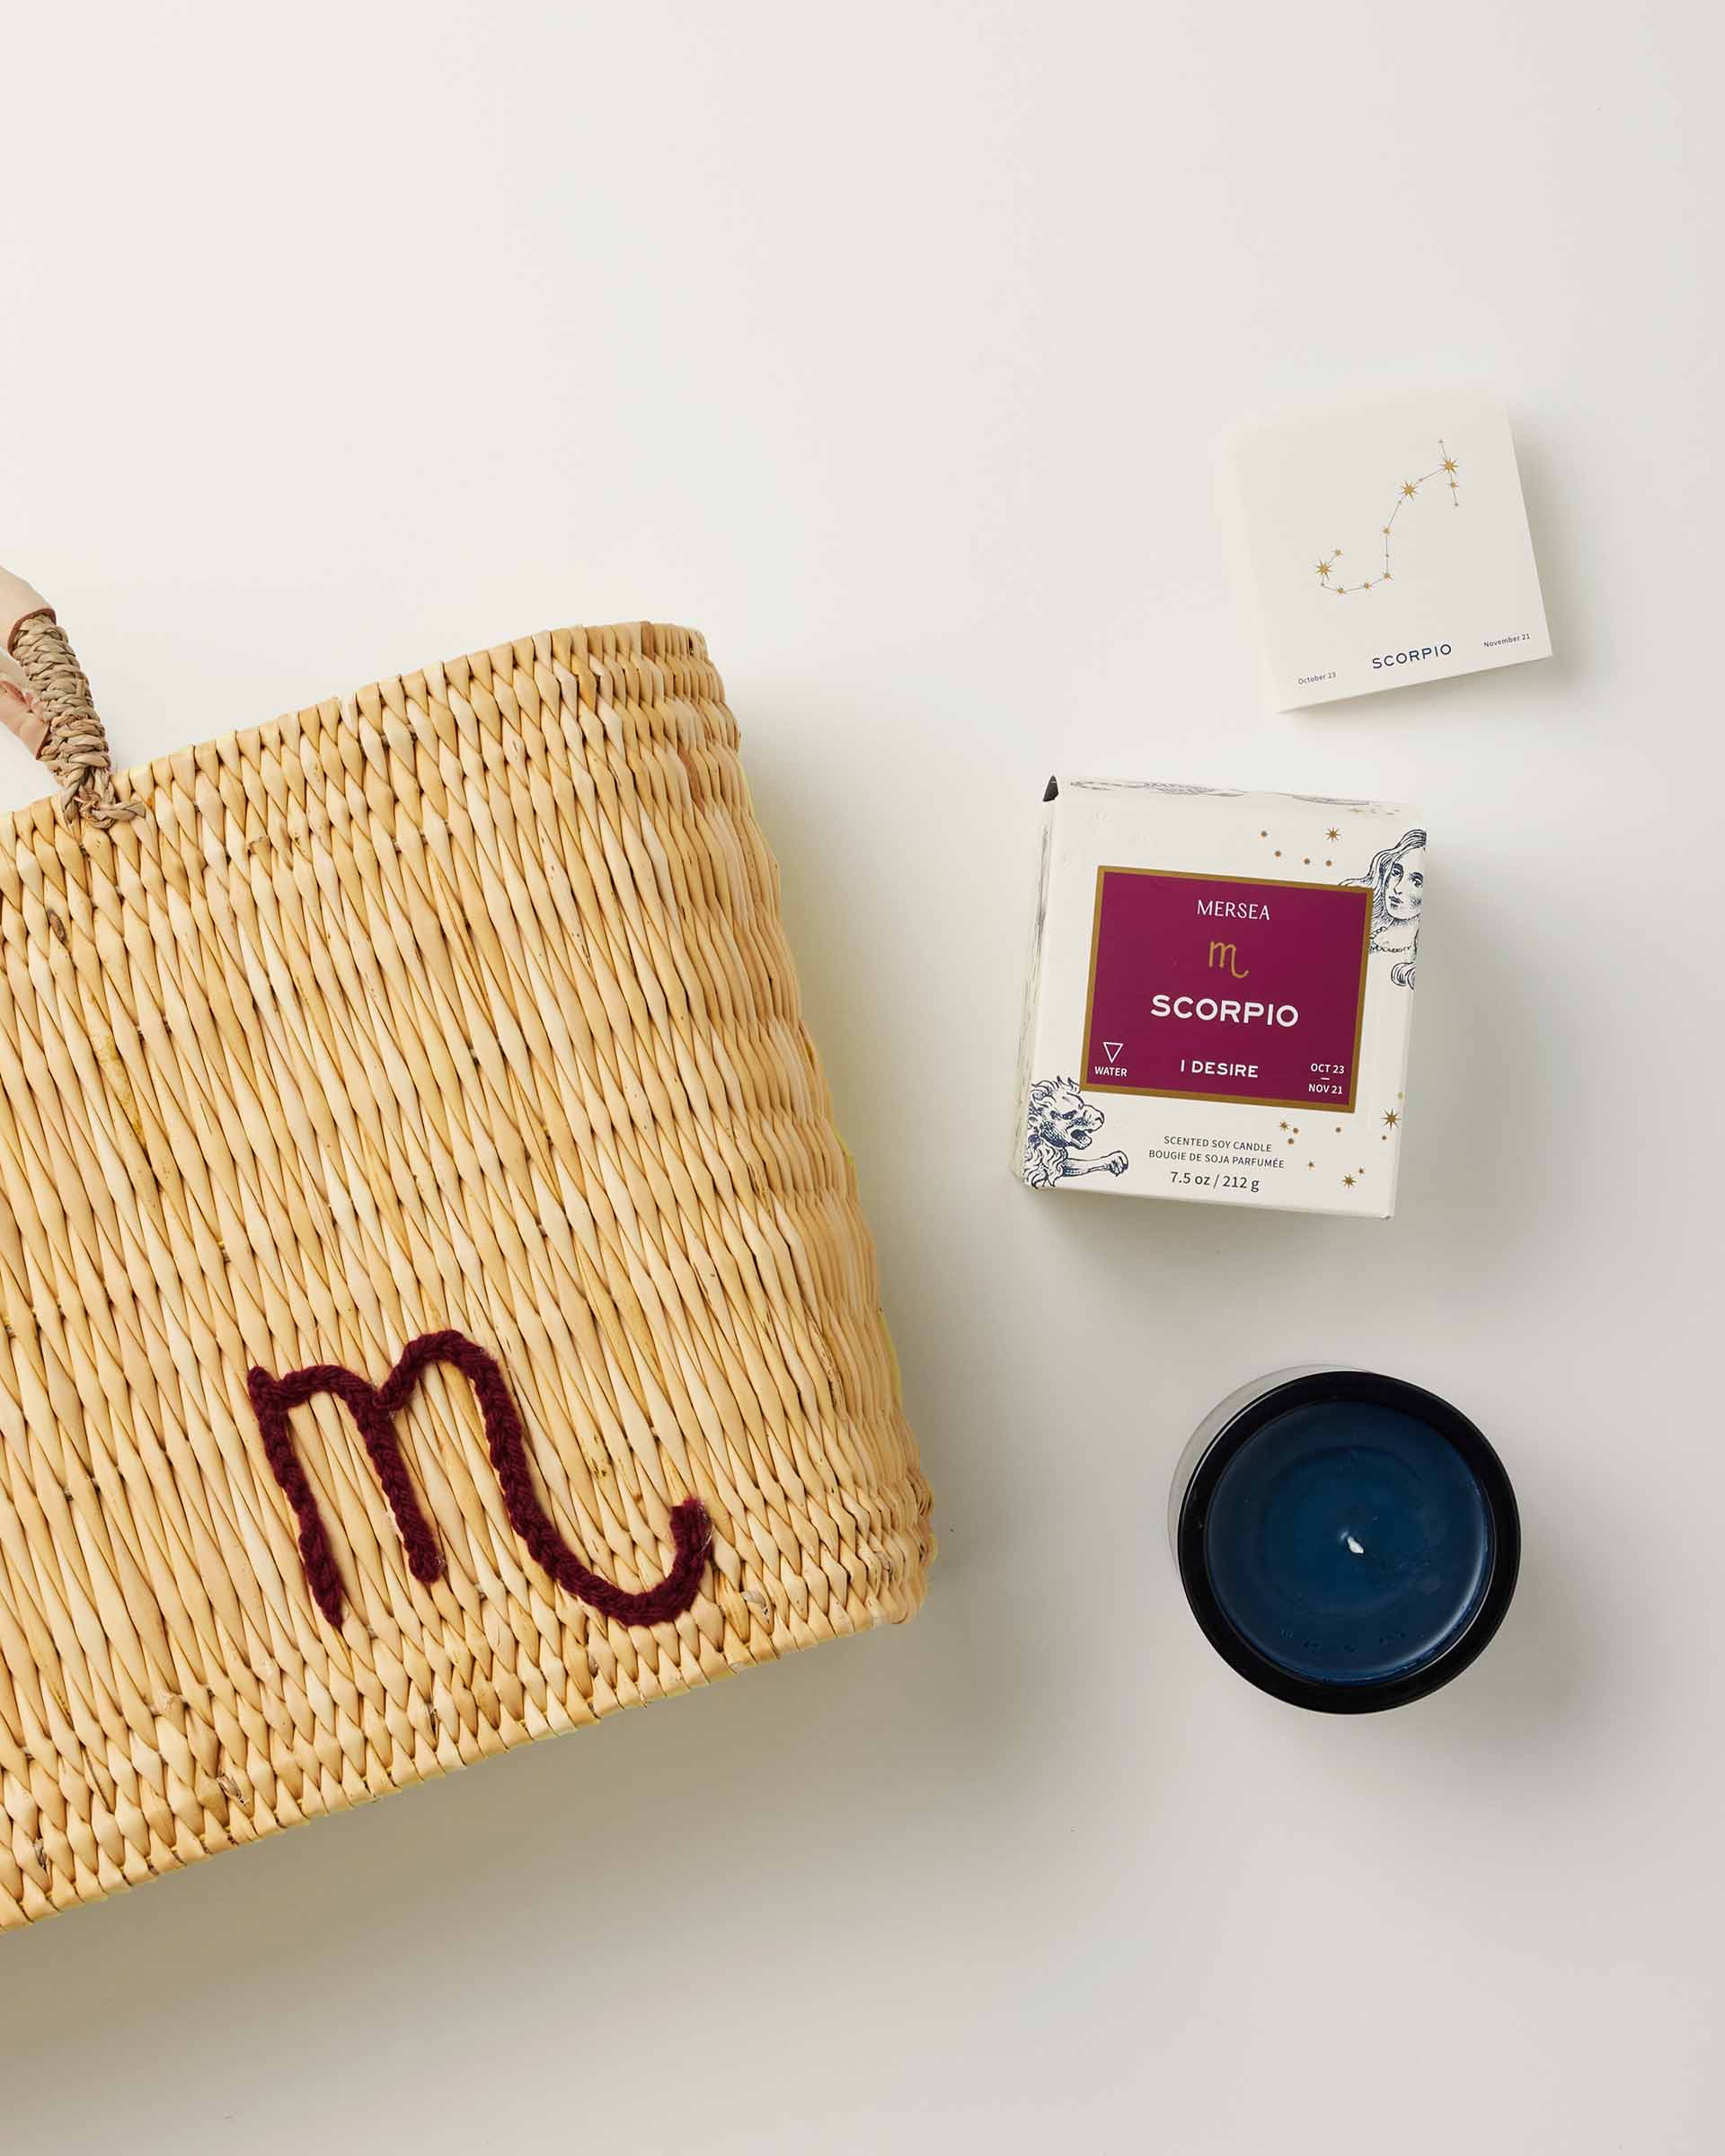 Mersea Scorpio candle next to candle box and medina bag on white background